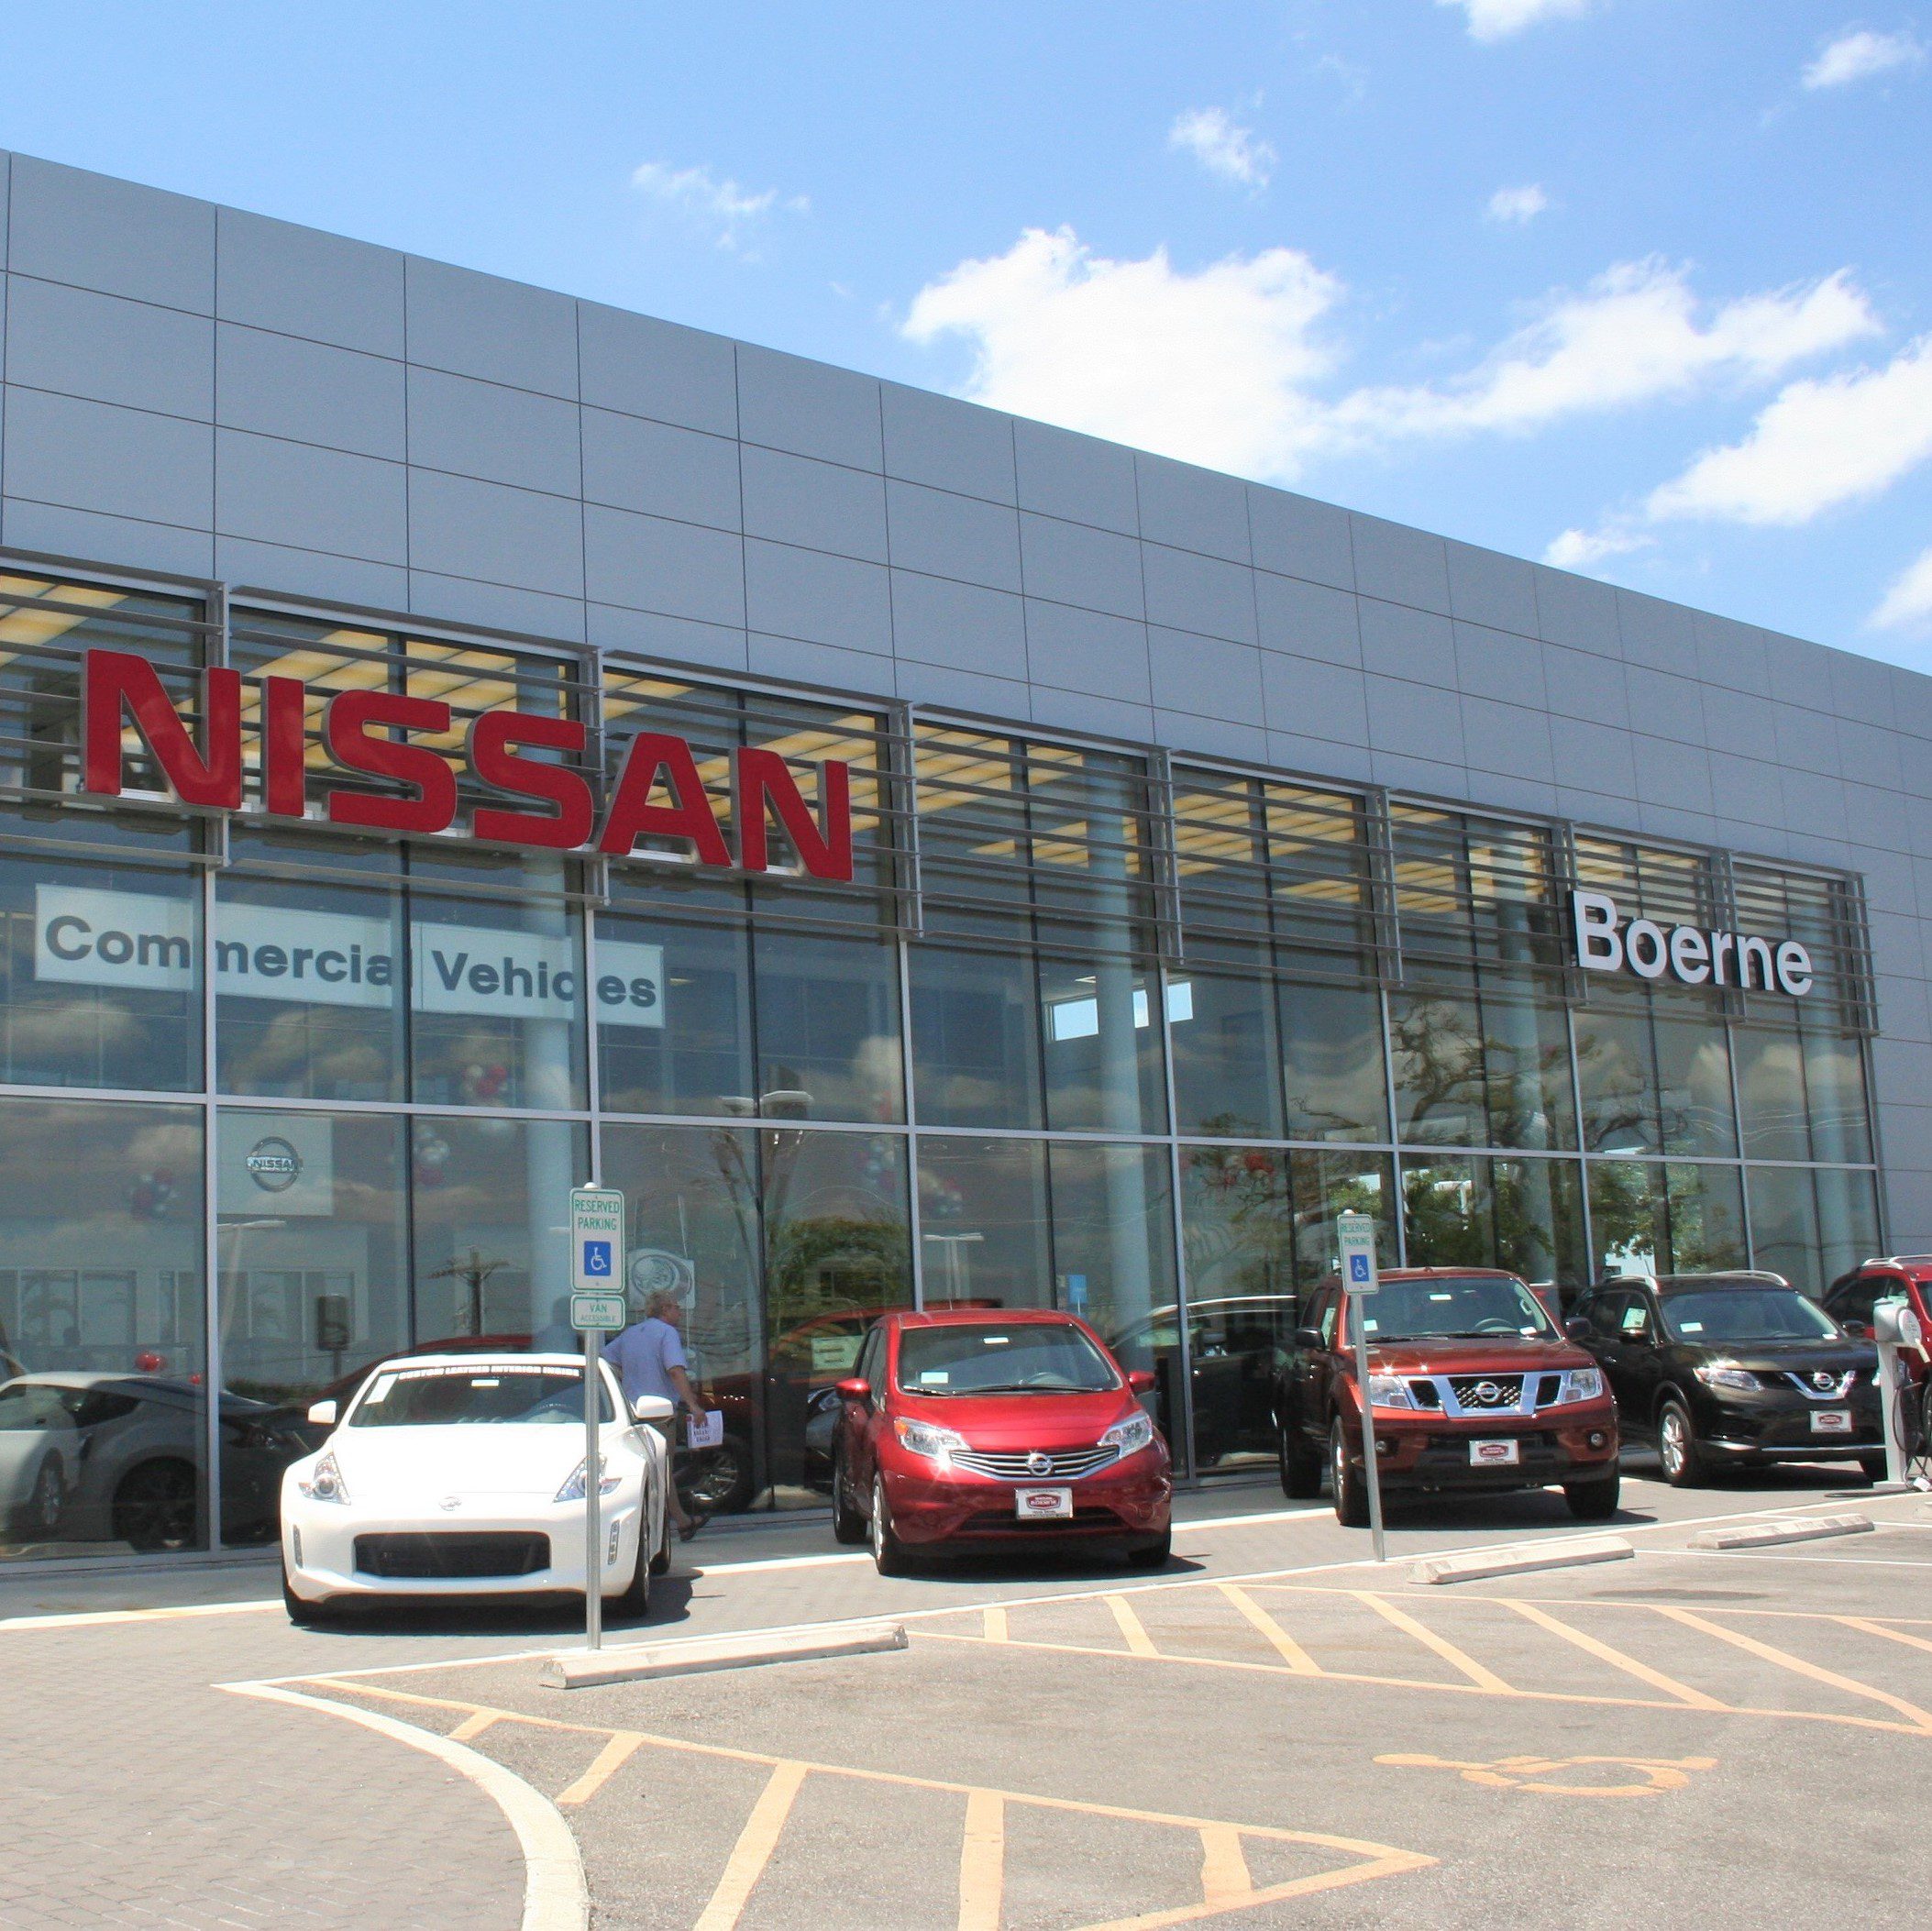 Nissan of Boerne Honored with Nissan’s Award of Excellence. Again.